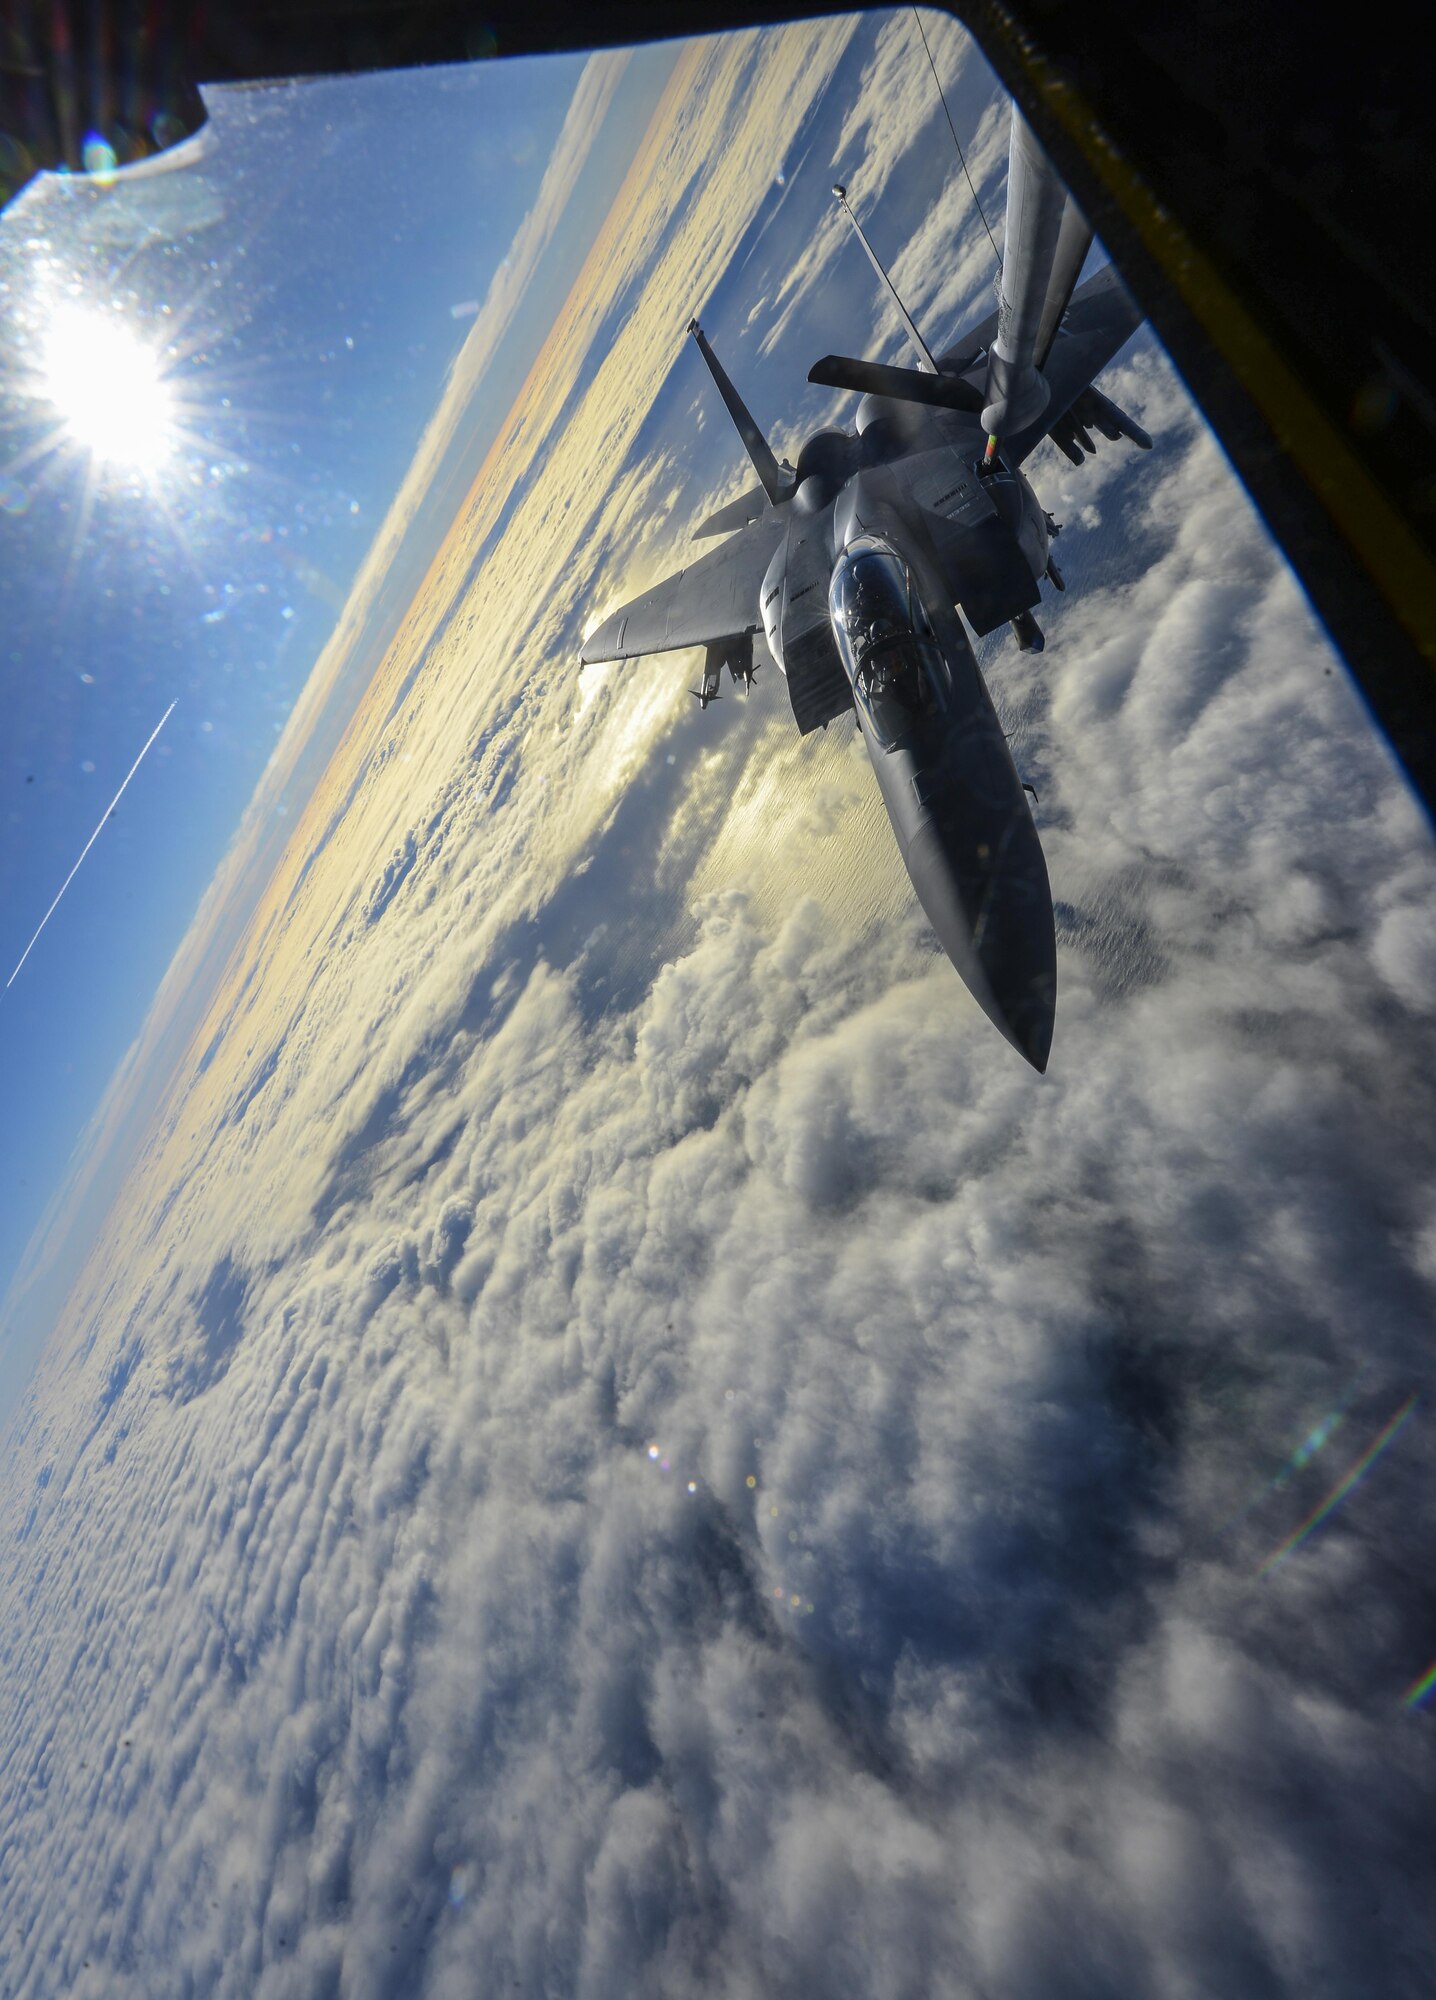 A U.S. Air Force F-15D Eagle assigned to the 48th Fighter Wing from RAF Lakenheath, England, takes fuel from a KC-135 Stratotanker assigned to the 349th Air Mobility Wing from Beale Air Force Base, Calif., Dec. 2, 2016, over the Atlantic Ocean. U.S. Air Force Col. Thomas Torkelson, 100th Air Refueling Wing commander at RAF Mildenhall, England, flew with the 48th FW to experience their mission of providing worldwide responsive combat air power and support. (U.S. Air Force photo by Staff Sgt. Micaiah Anthony) 